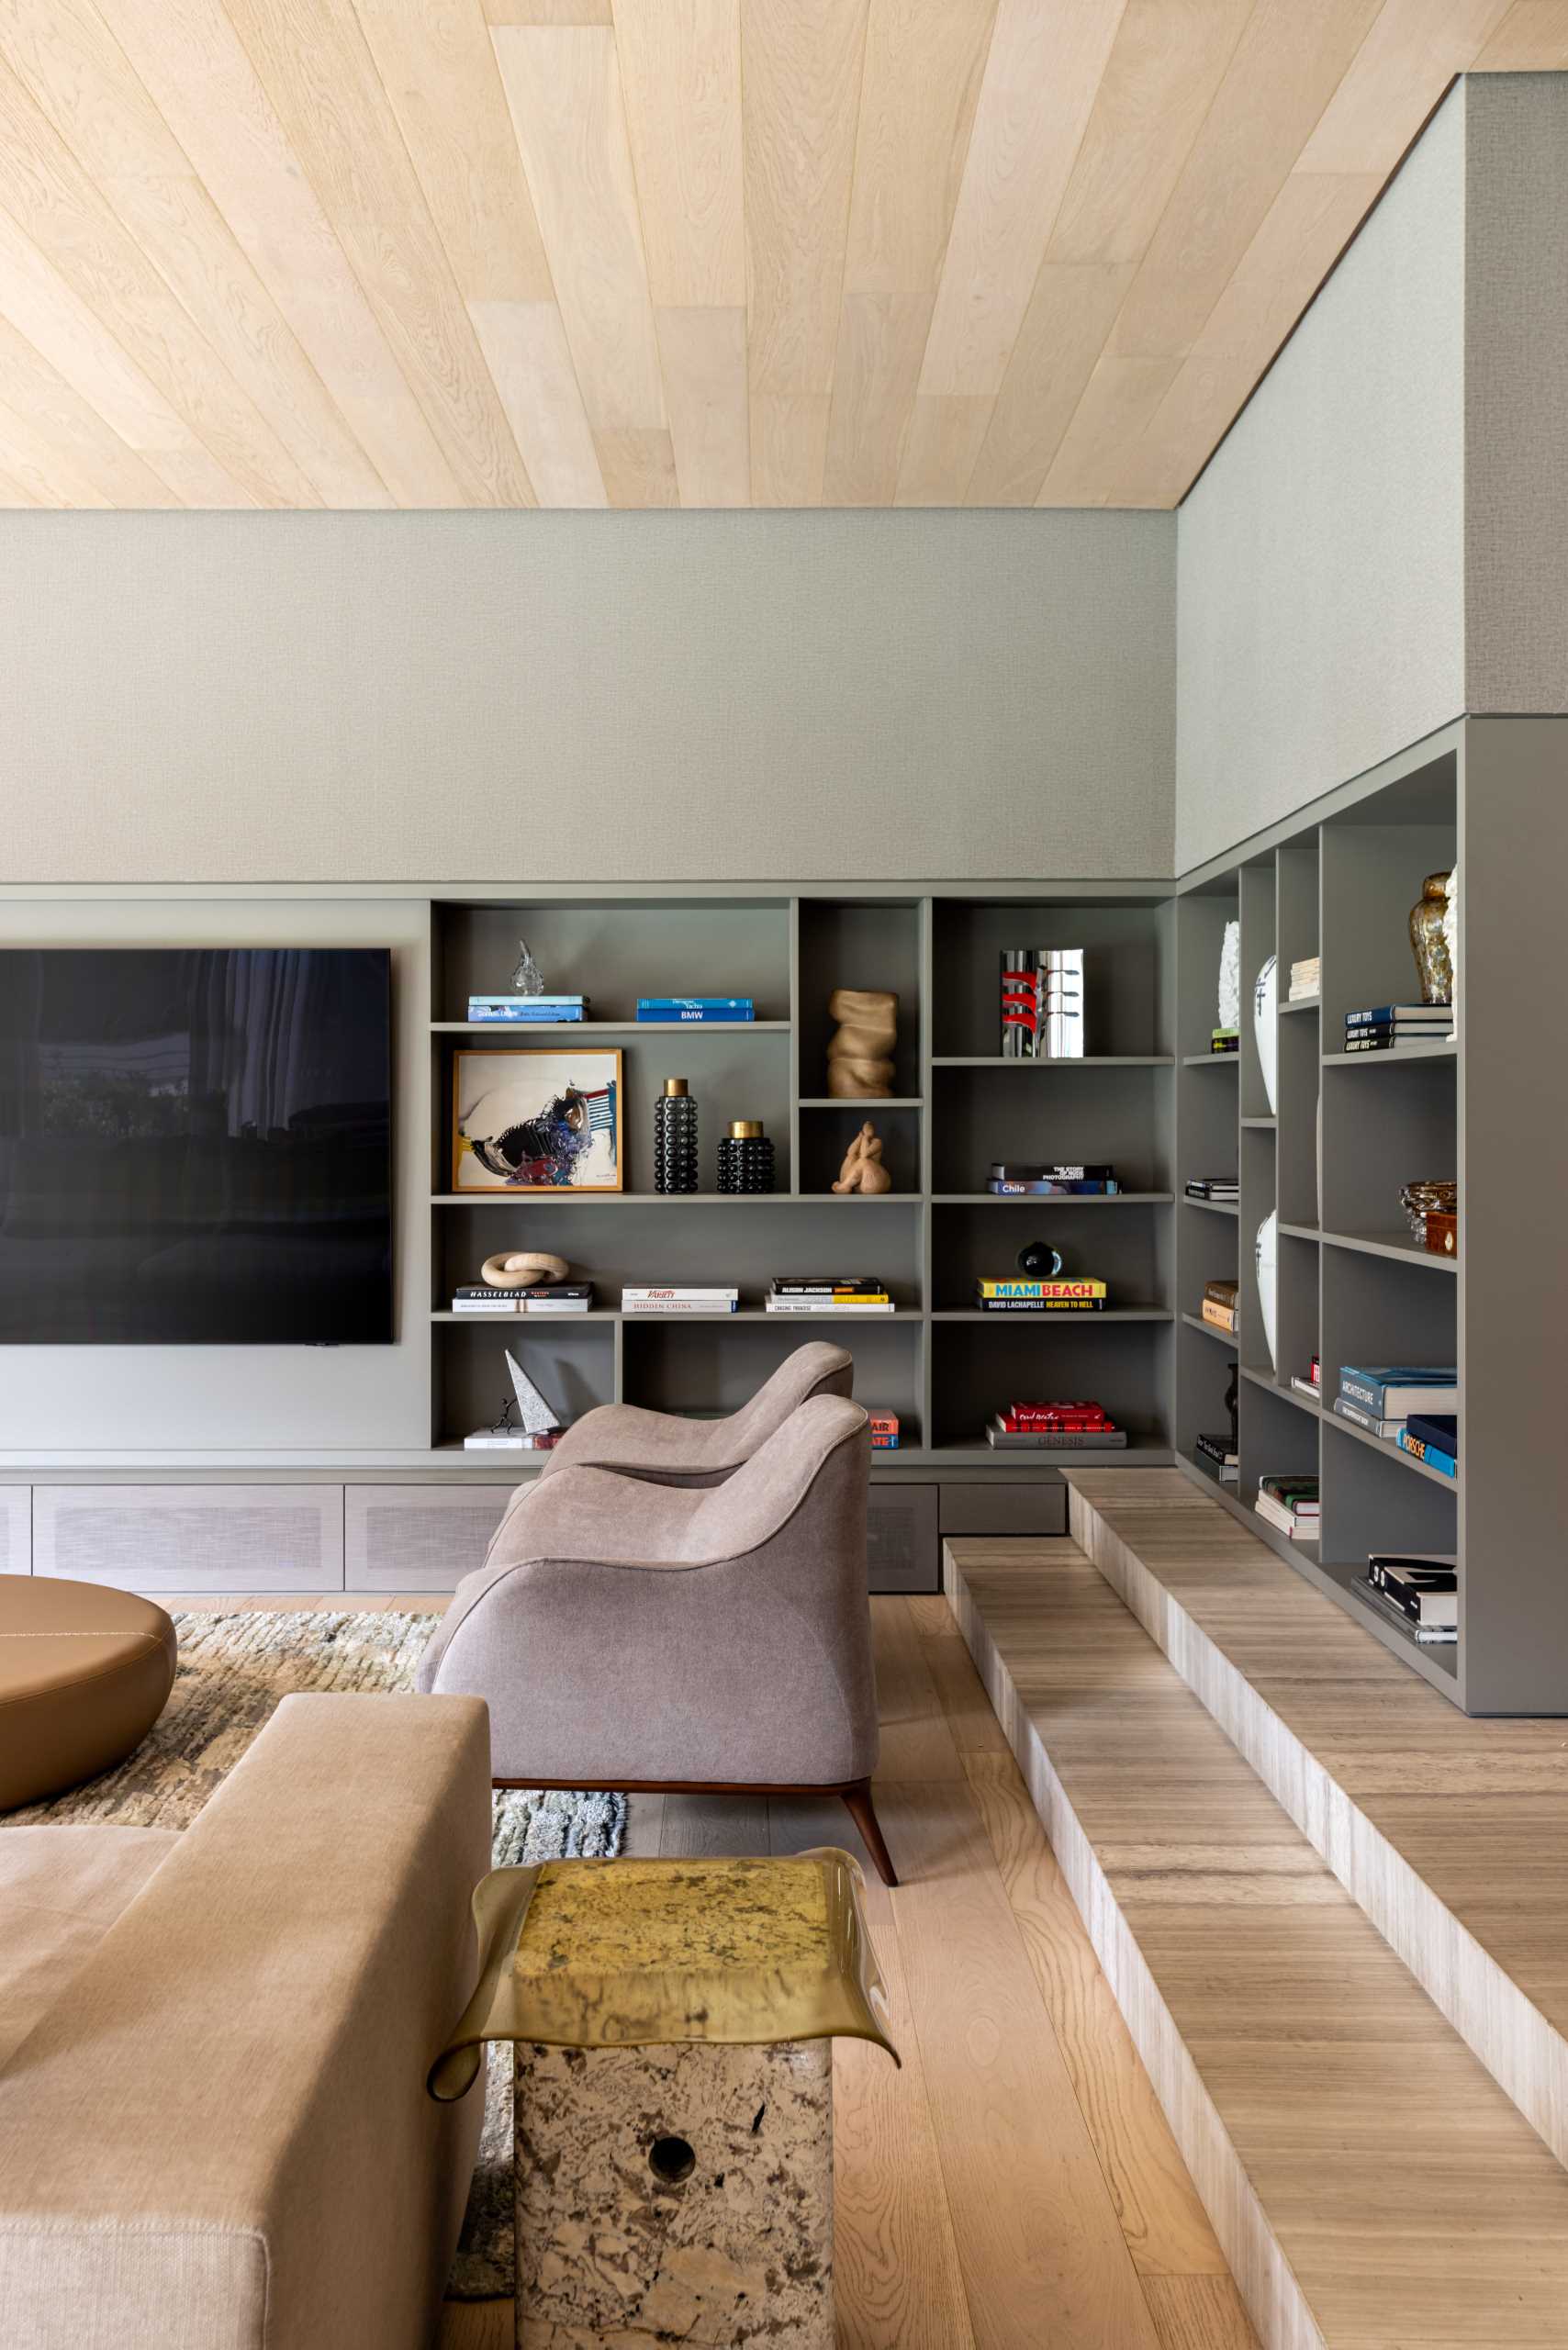 A modern media room with built-in shelving that includes hidden lighting.